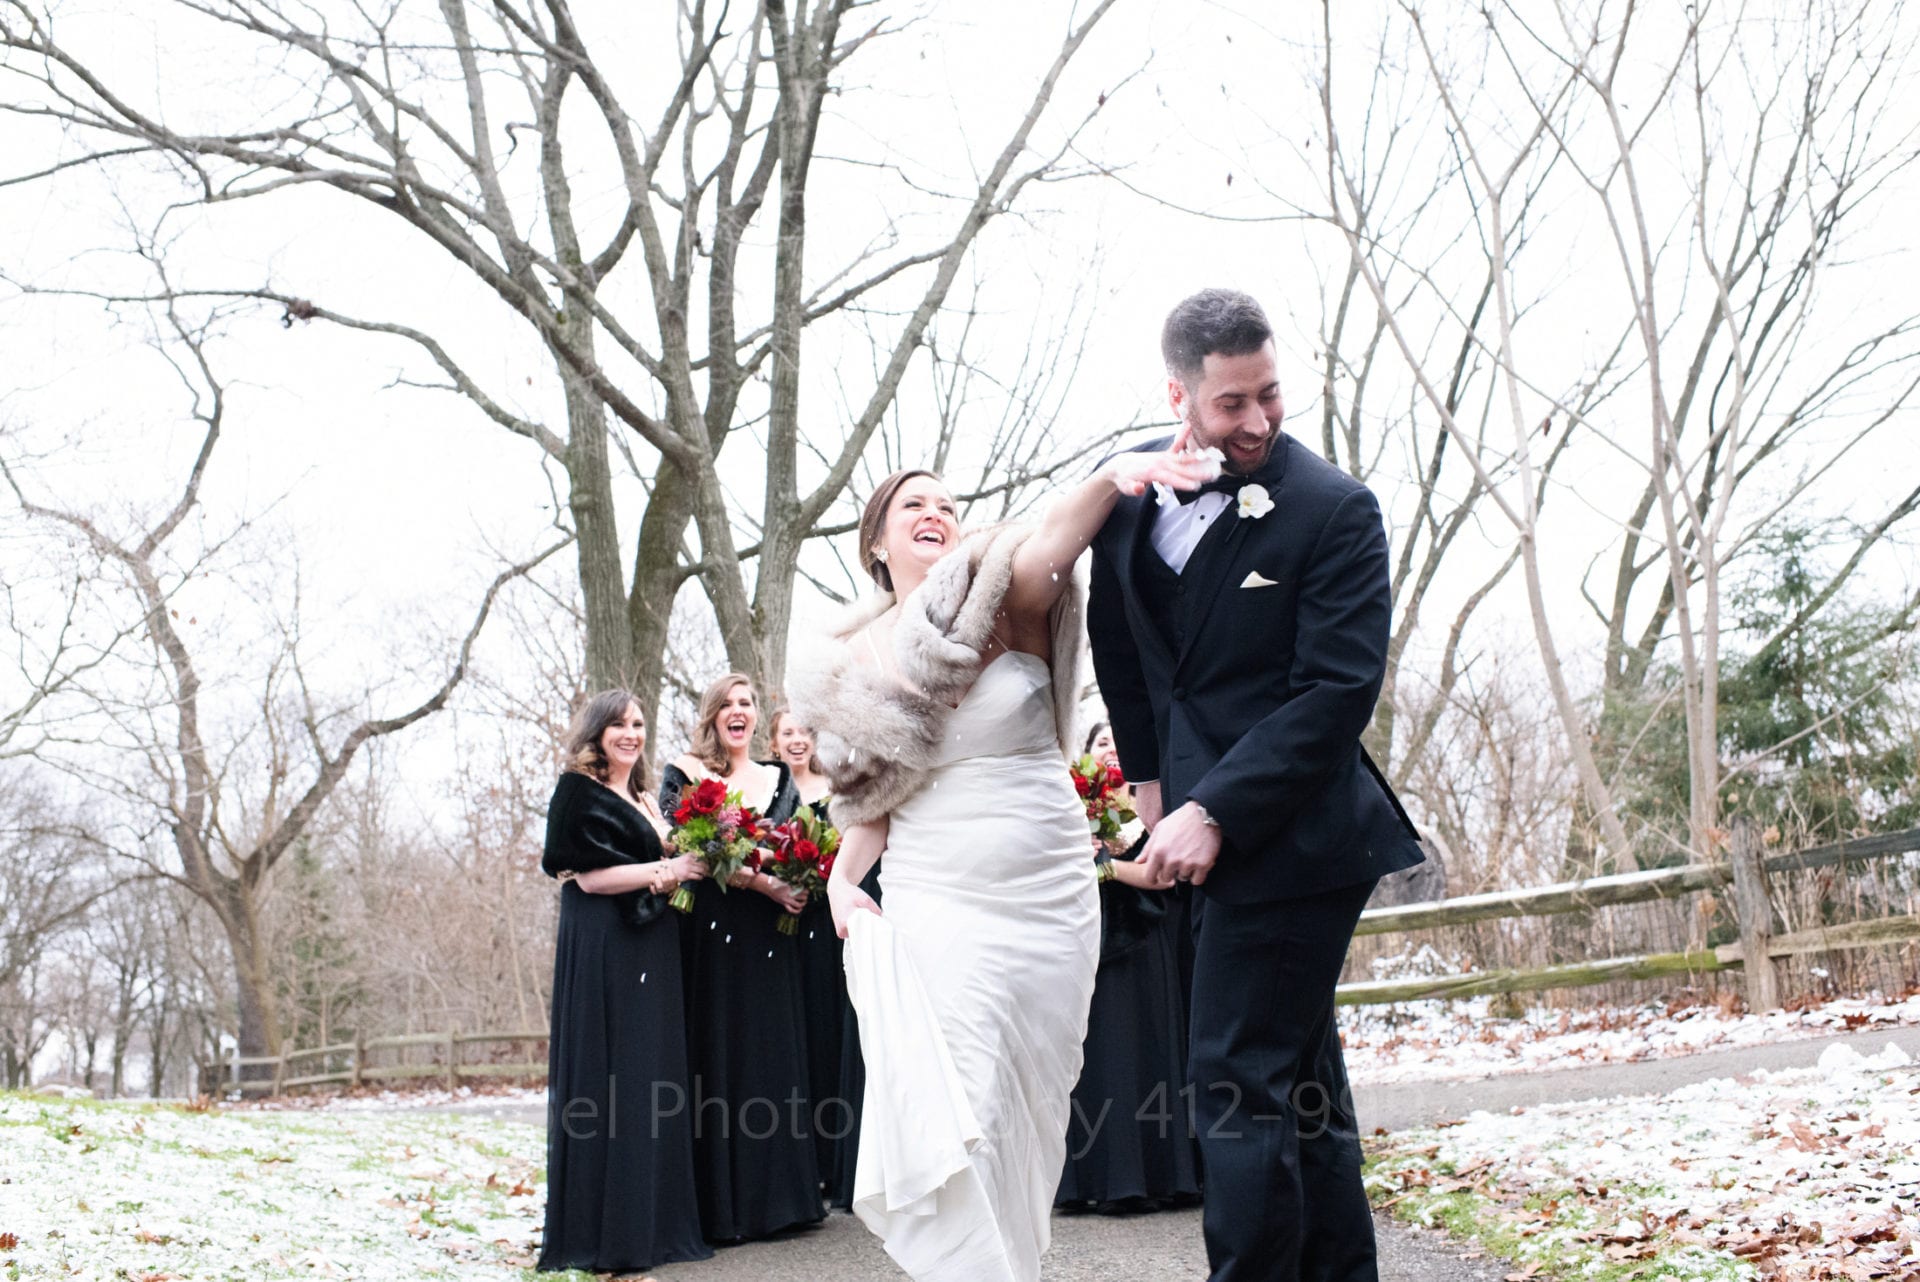 A groom turns his face as his bride smashes a snowball in his face as her bridesmaids laugh.